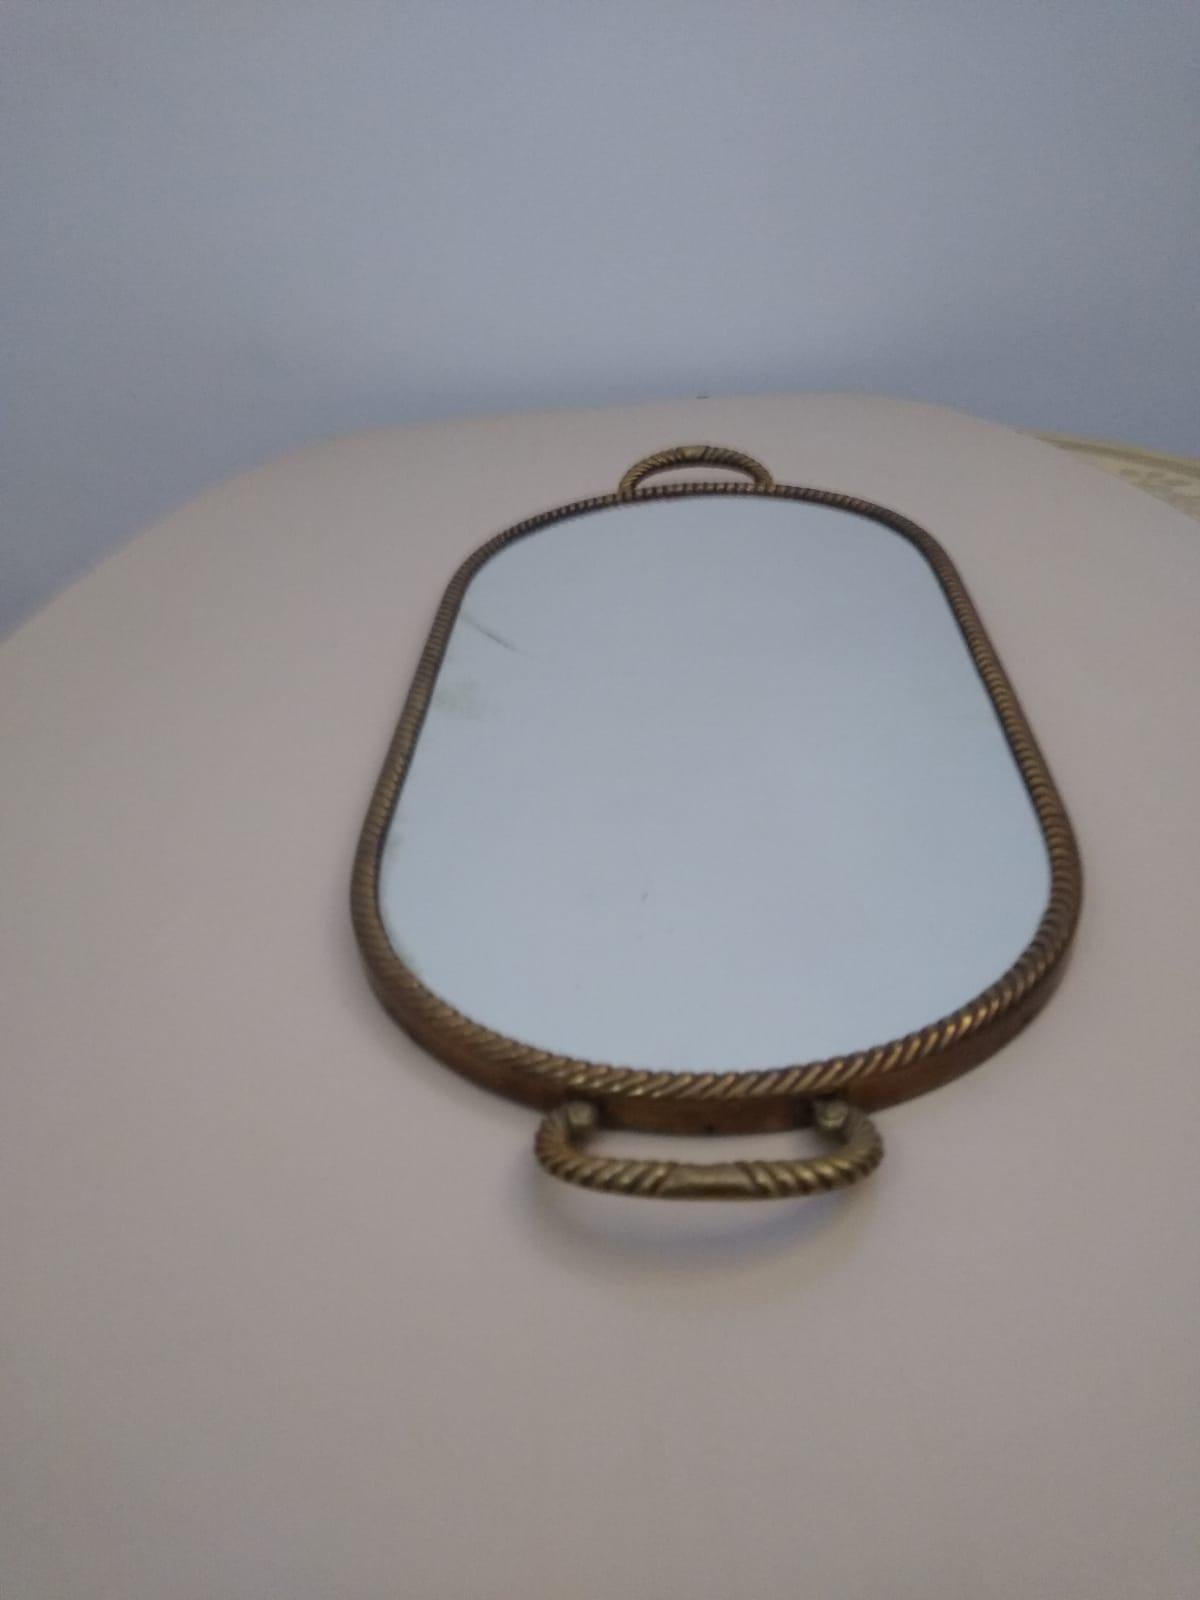 Fine and elegant oval shape serving tray made of brass with beautiful handles and mirrored glass top. Made in Italy in the 1950s.